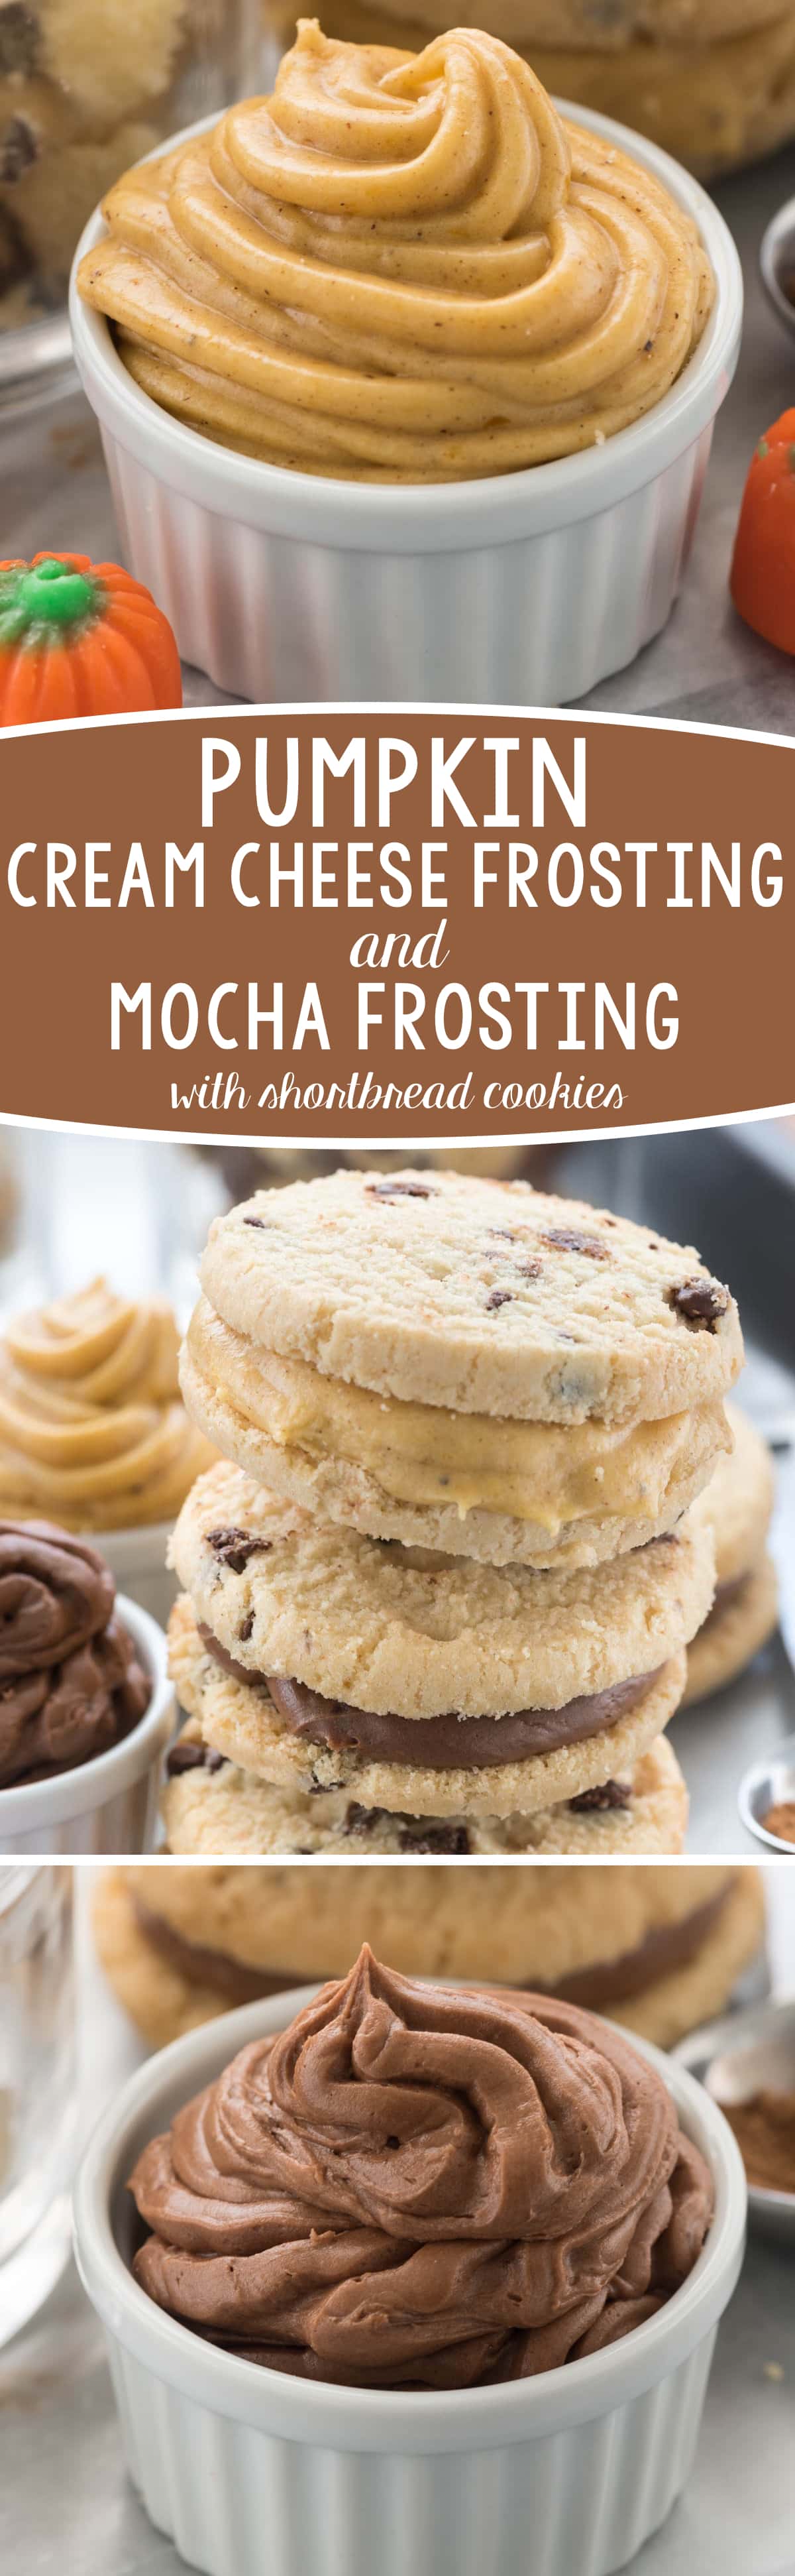 My FAVORITE easy frosting recipes: Pumpkin Spice Cream Cheese Frosting and Mocha Frosting - perfect to make sandwich cookies with!